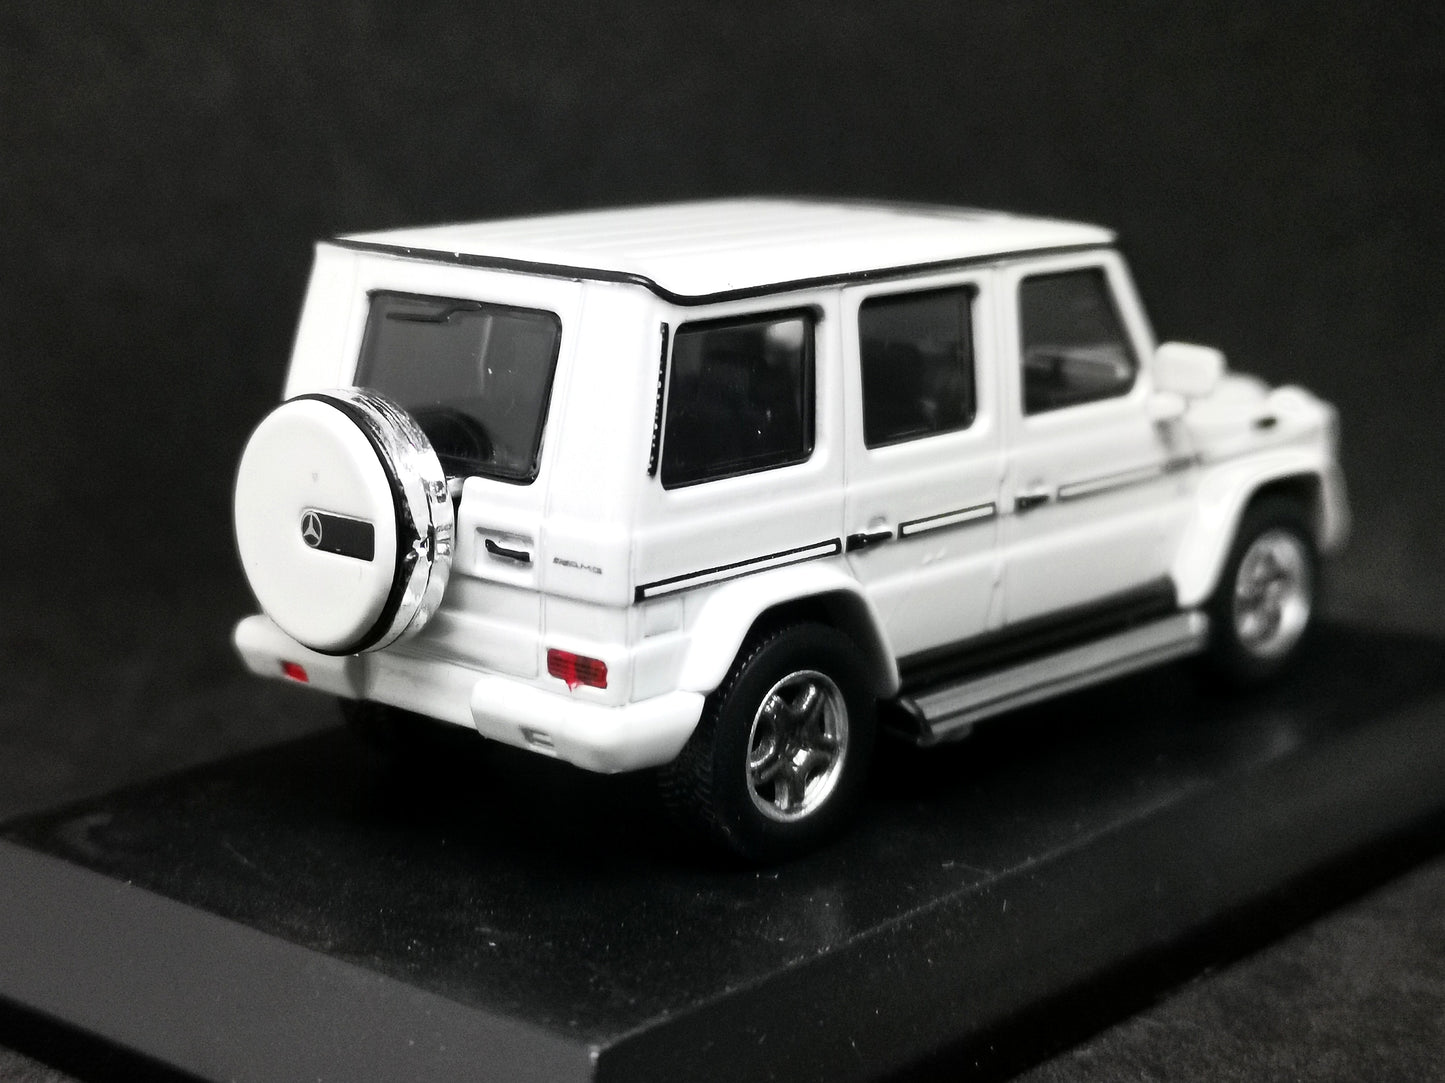 Kyosho 1:64 Scale Miniature Car Collection Mercedes-Benz G500 White